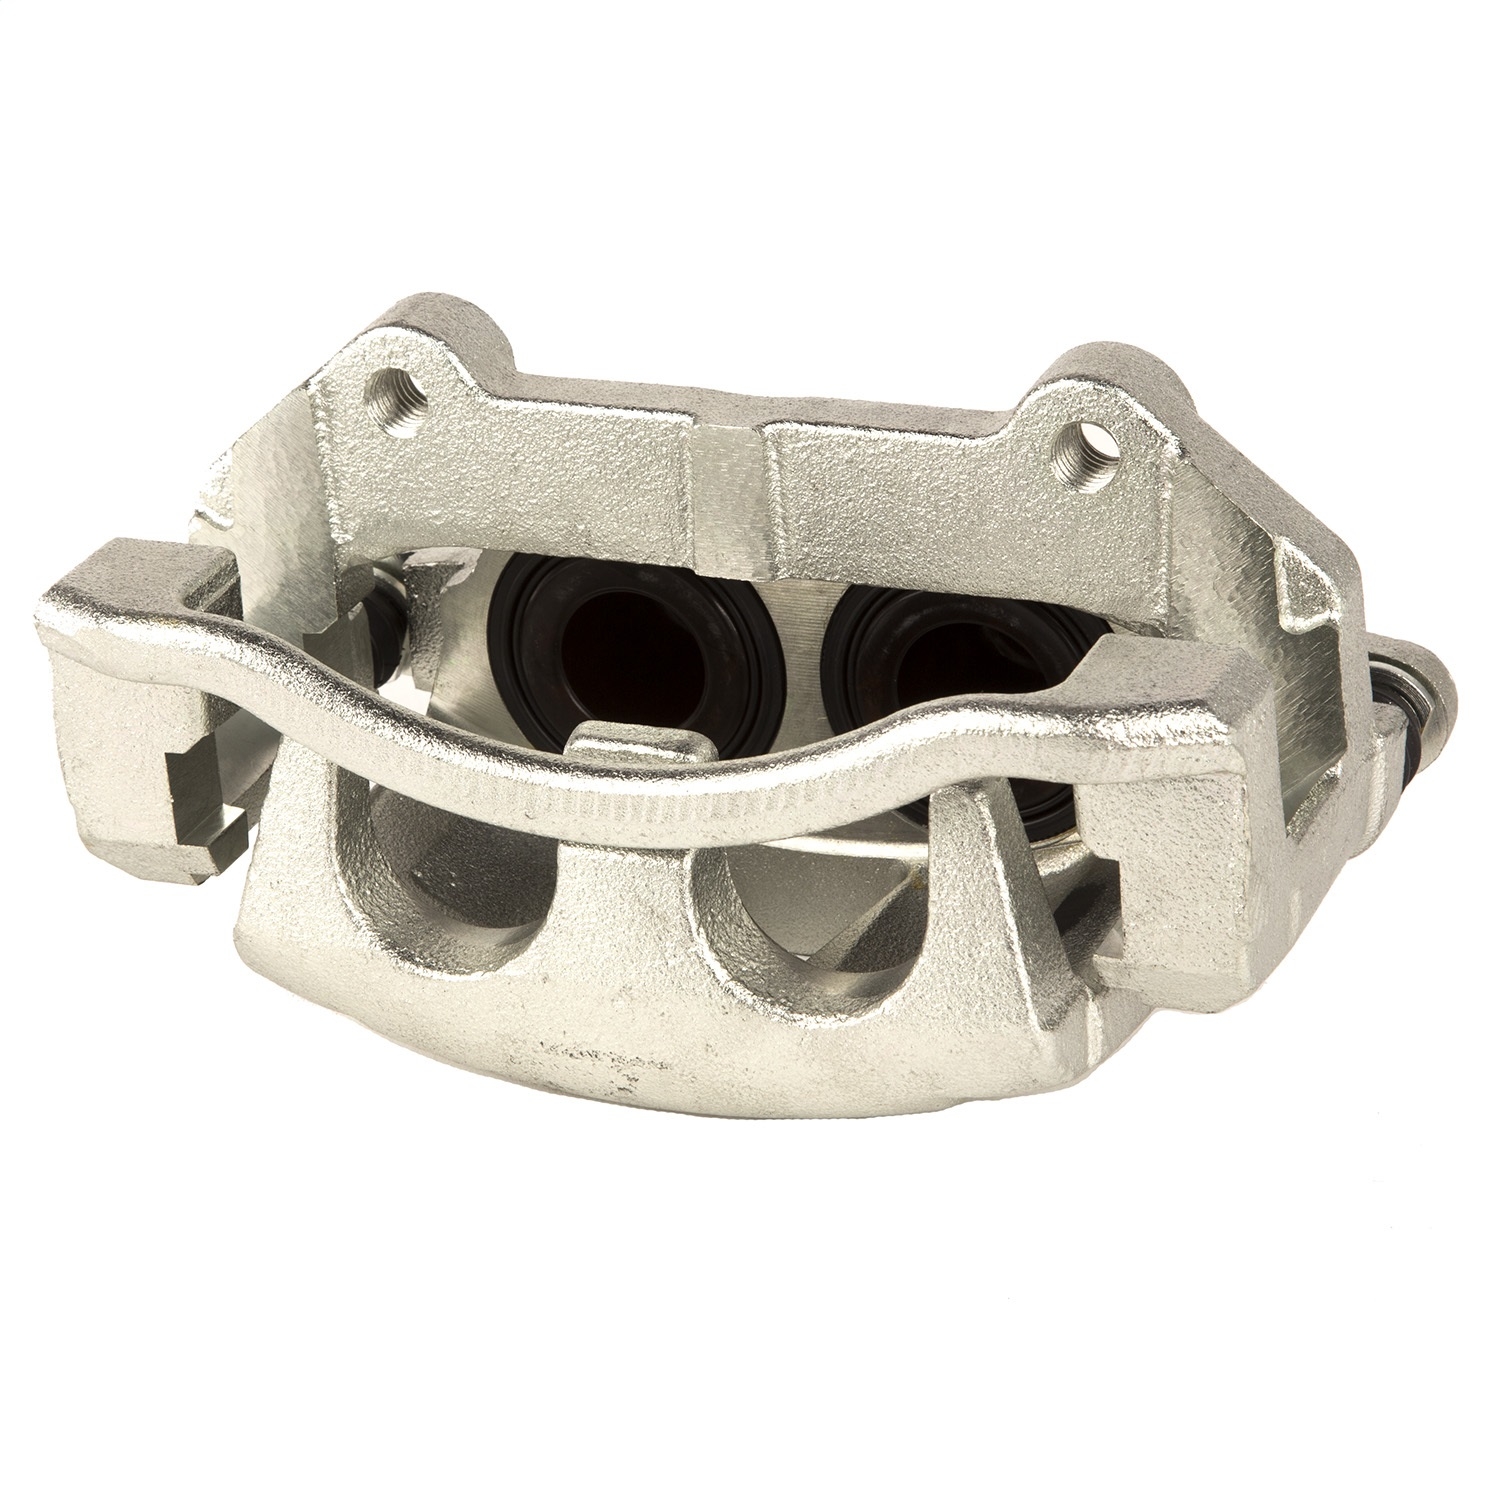 Omix This Front Right Disc Brake Caliper From Omix Fits 05-10 Jeep Grand Cherokee Wk And 06-10